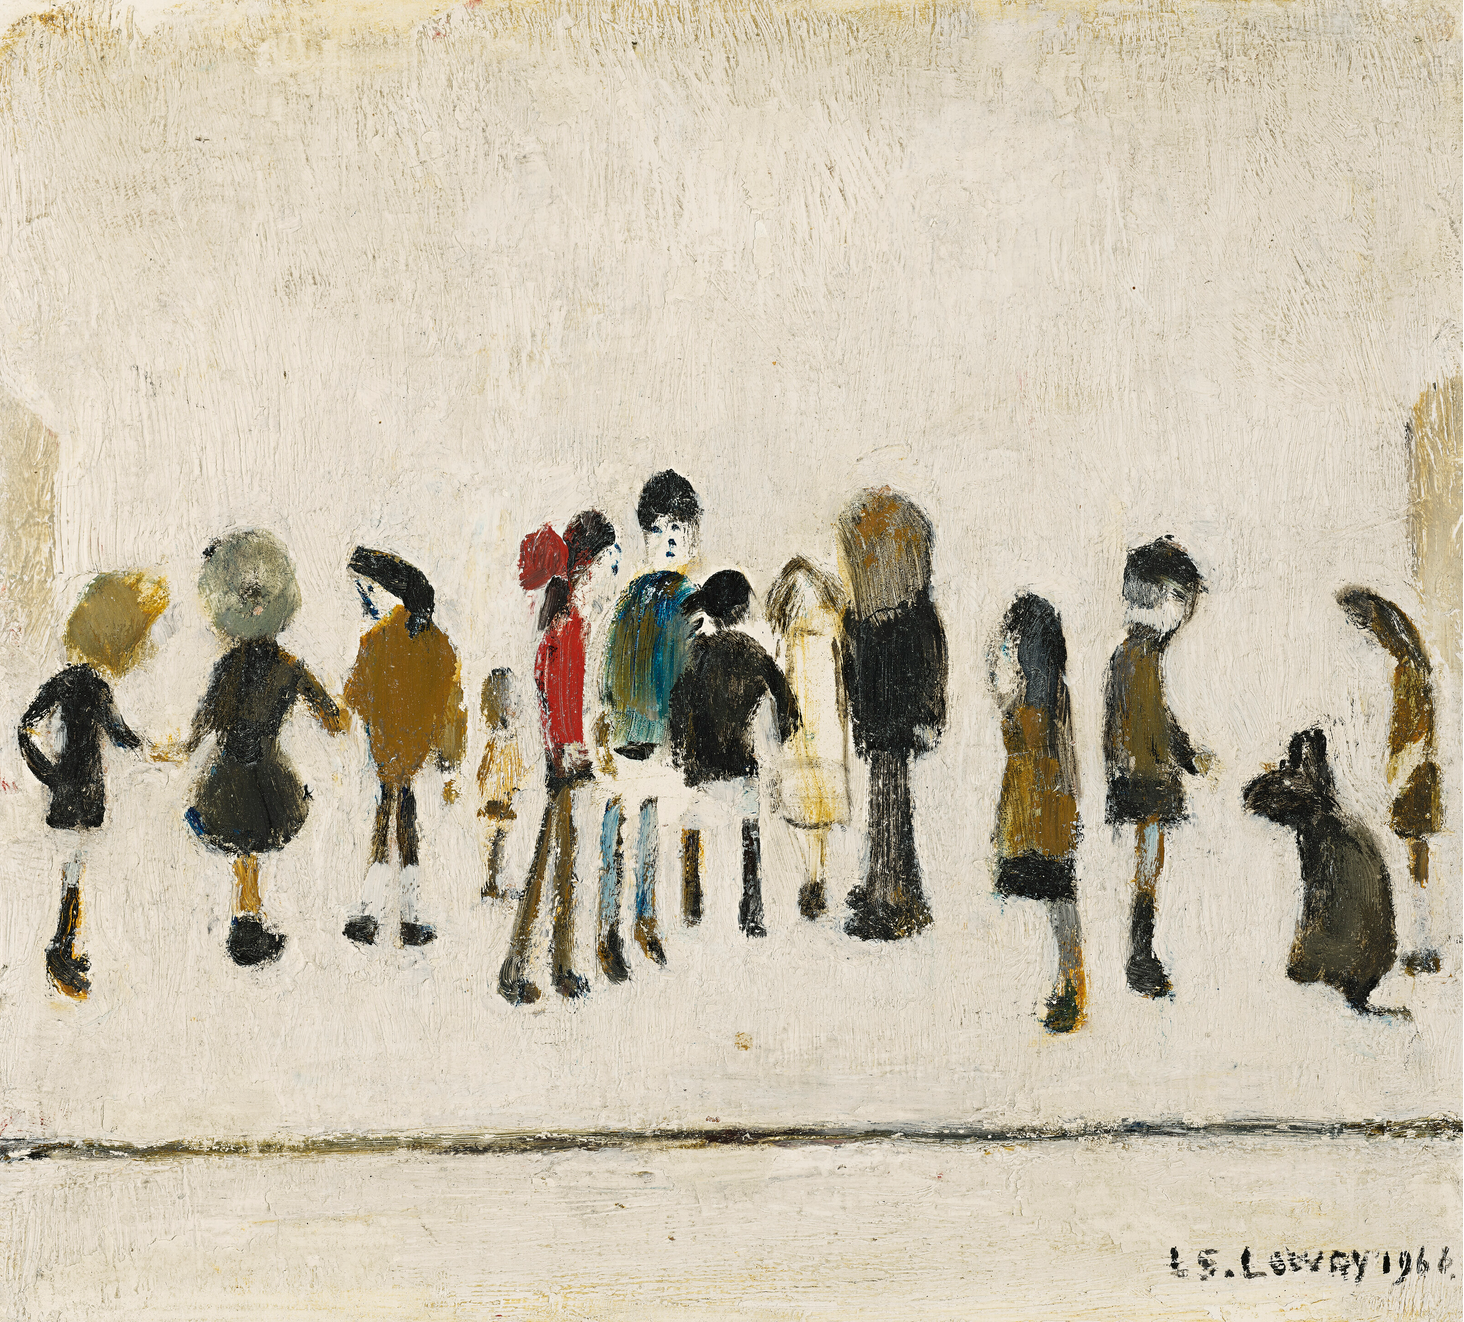 Children in the Street (1966) by Laurence Stephen Lowry (1887 - 1976), English artist.